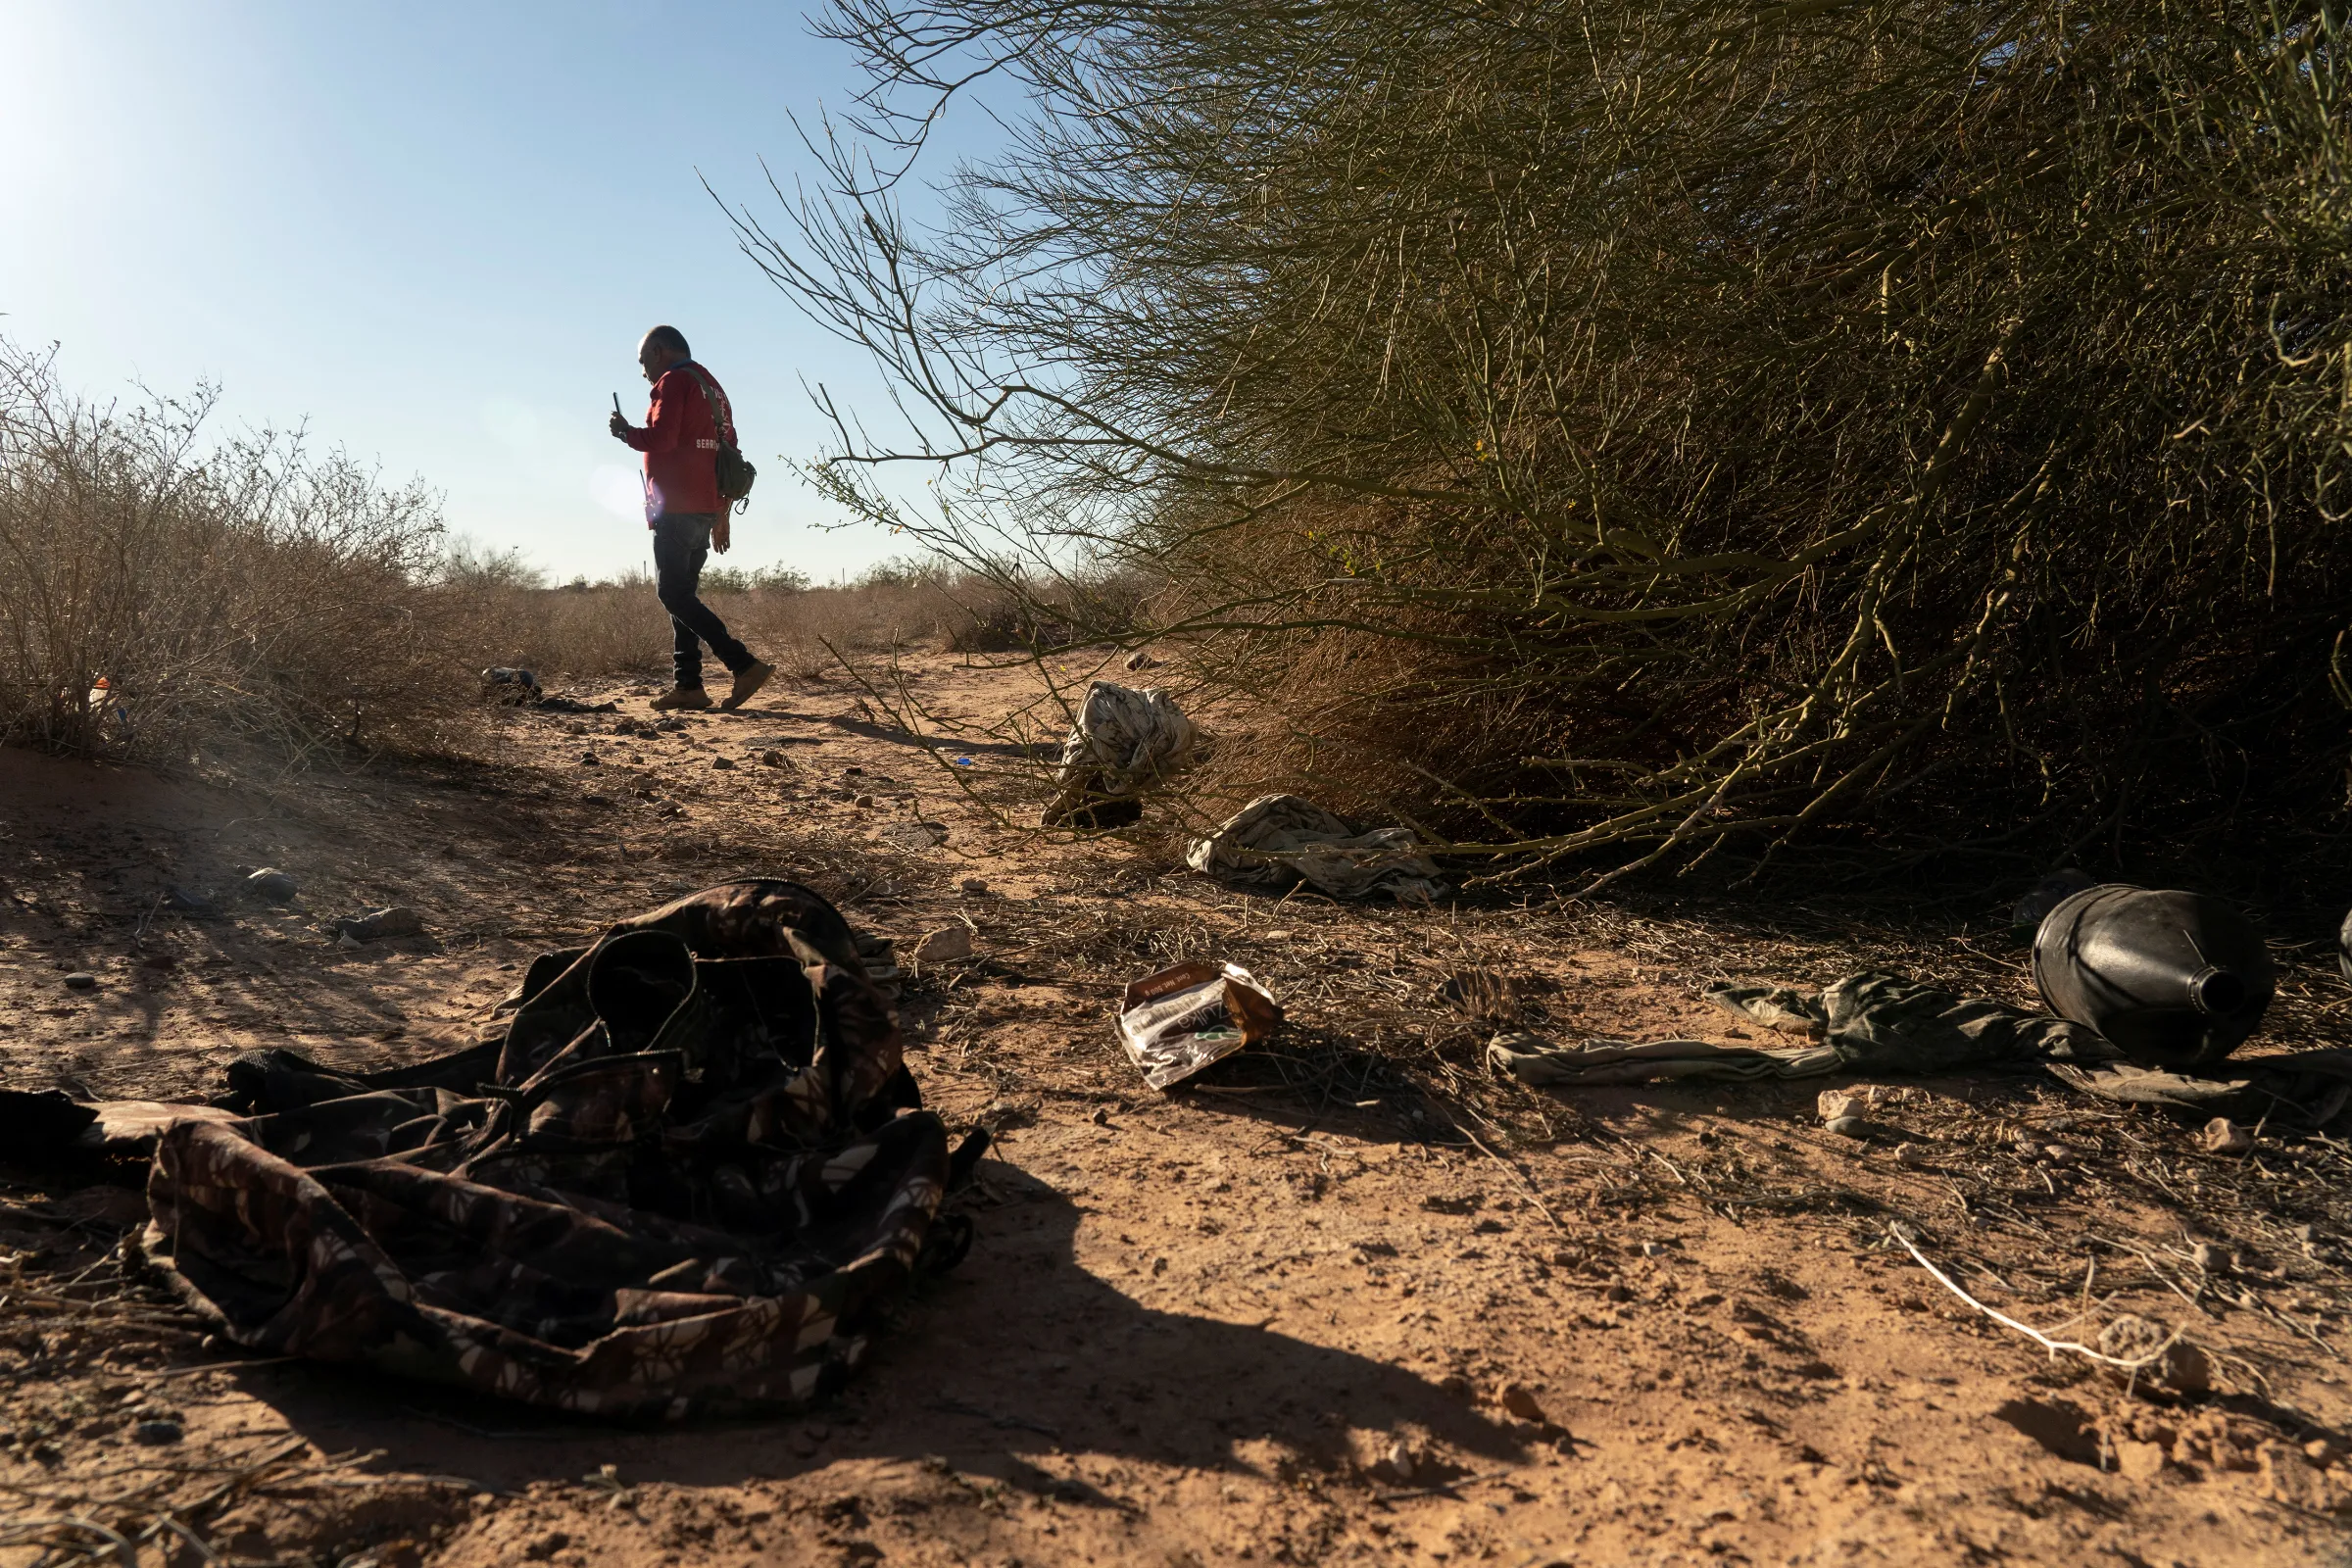 Member of the search and rescue team Paralelo 31, walks in a desert while on a search mission for the corpse of migrants in Agua Caliente, Arizona, U.S., February 19, 2022